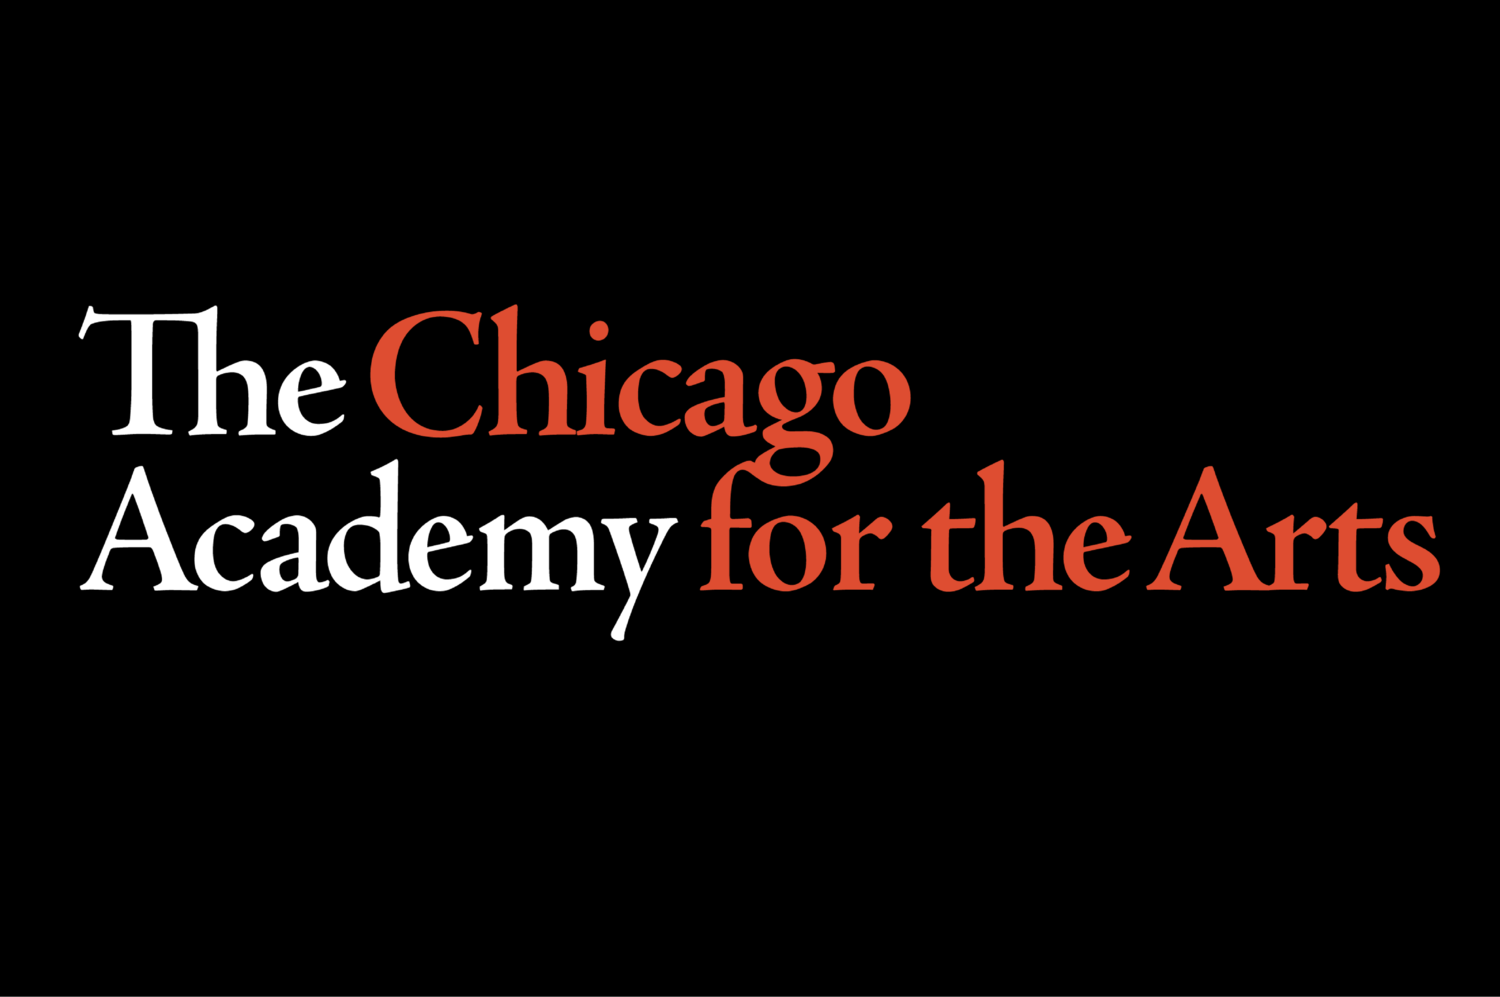 Chicago Academy for the Arts | ChicagoAcademyForTheArts.org